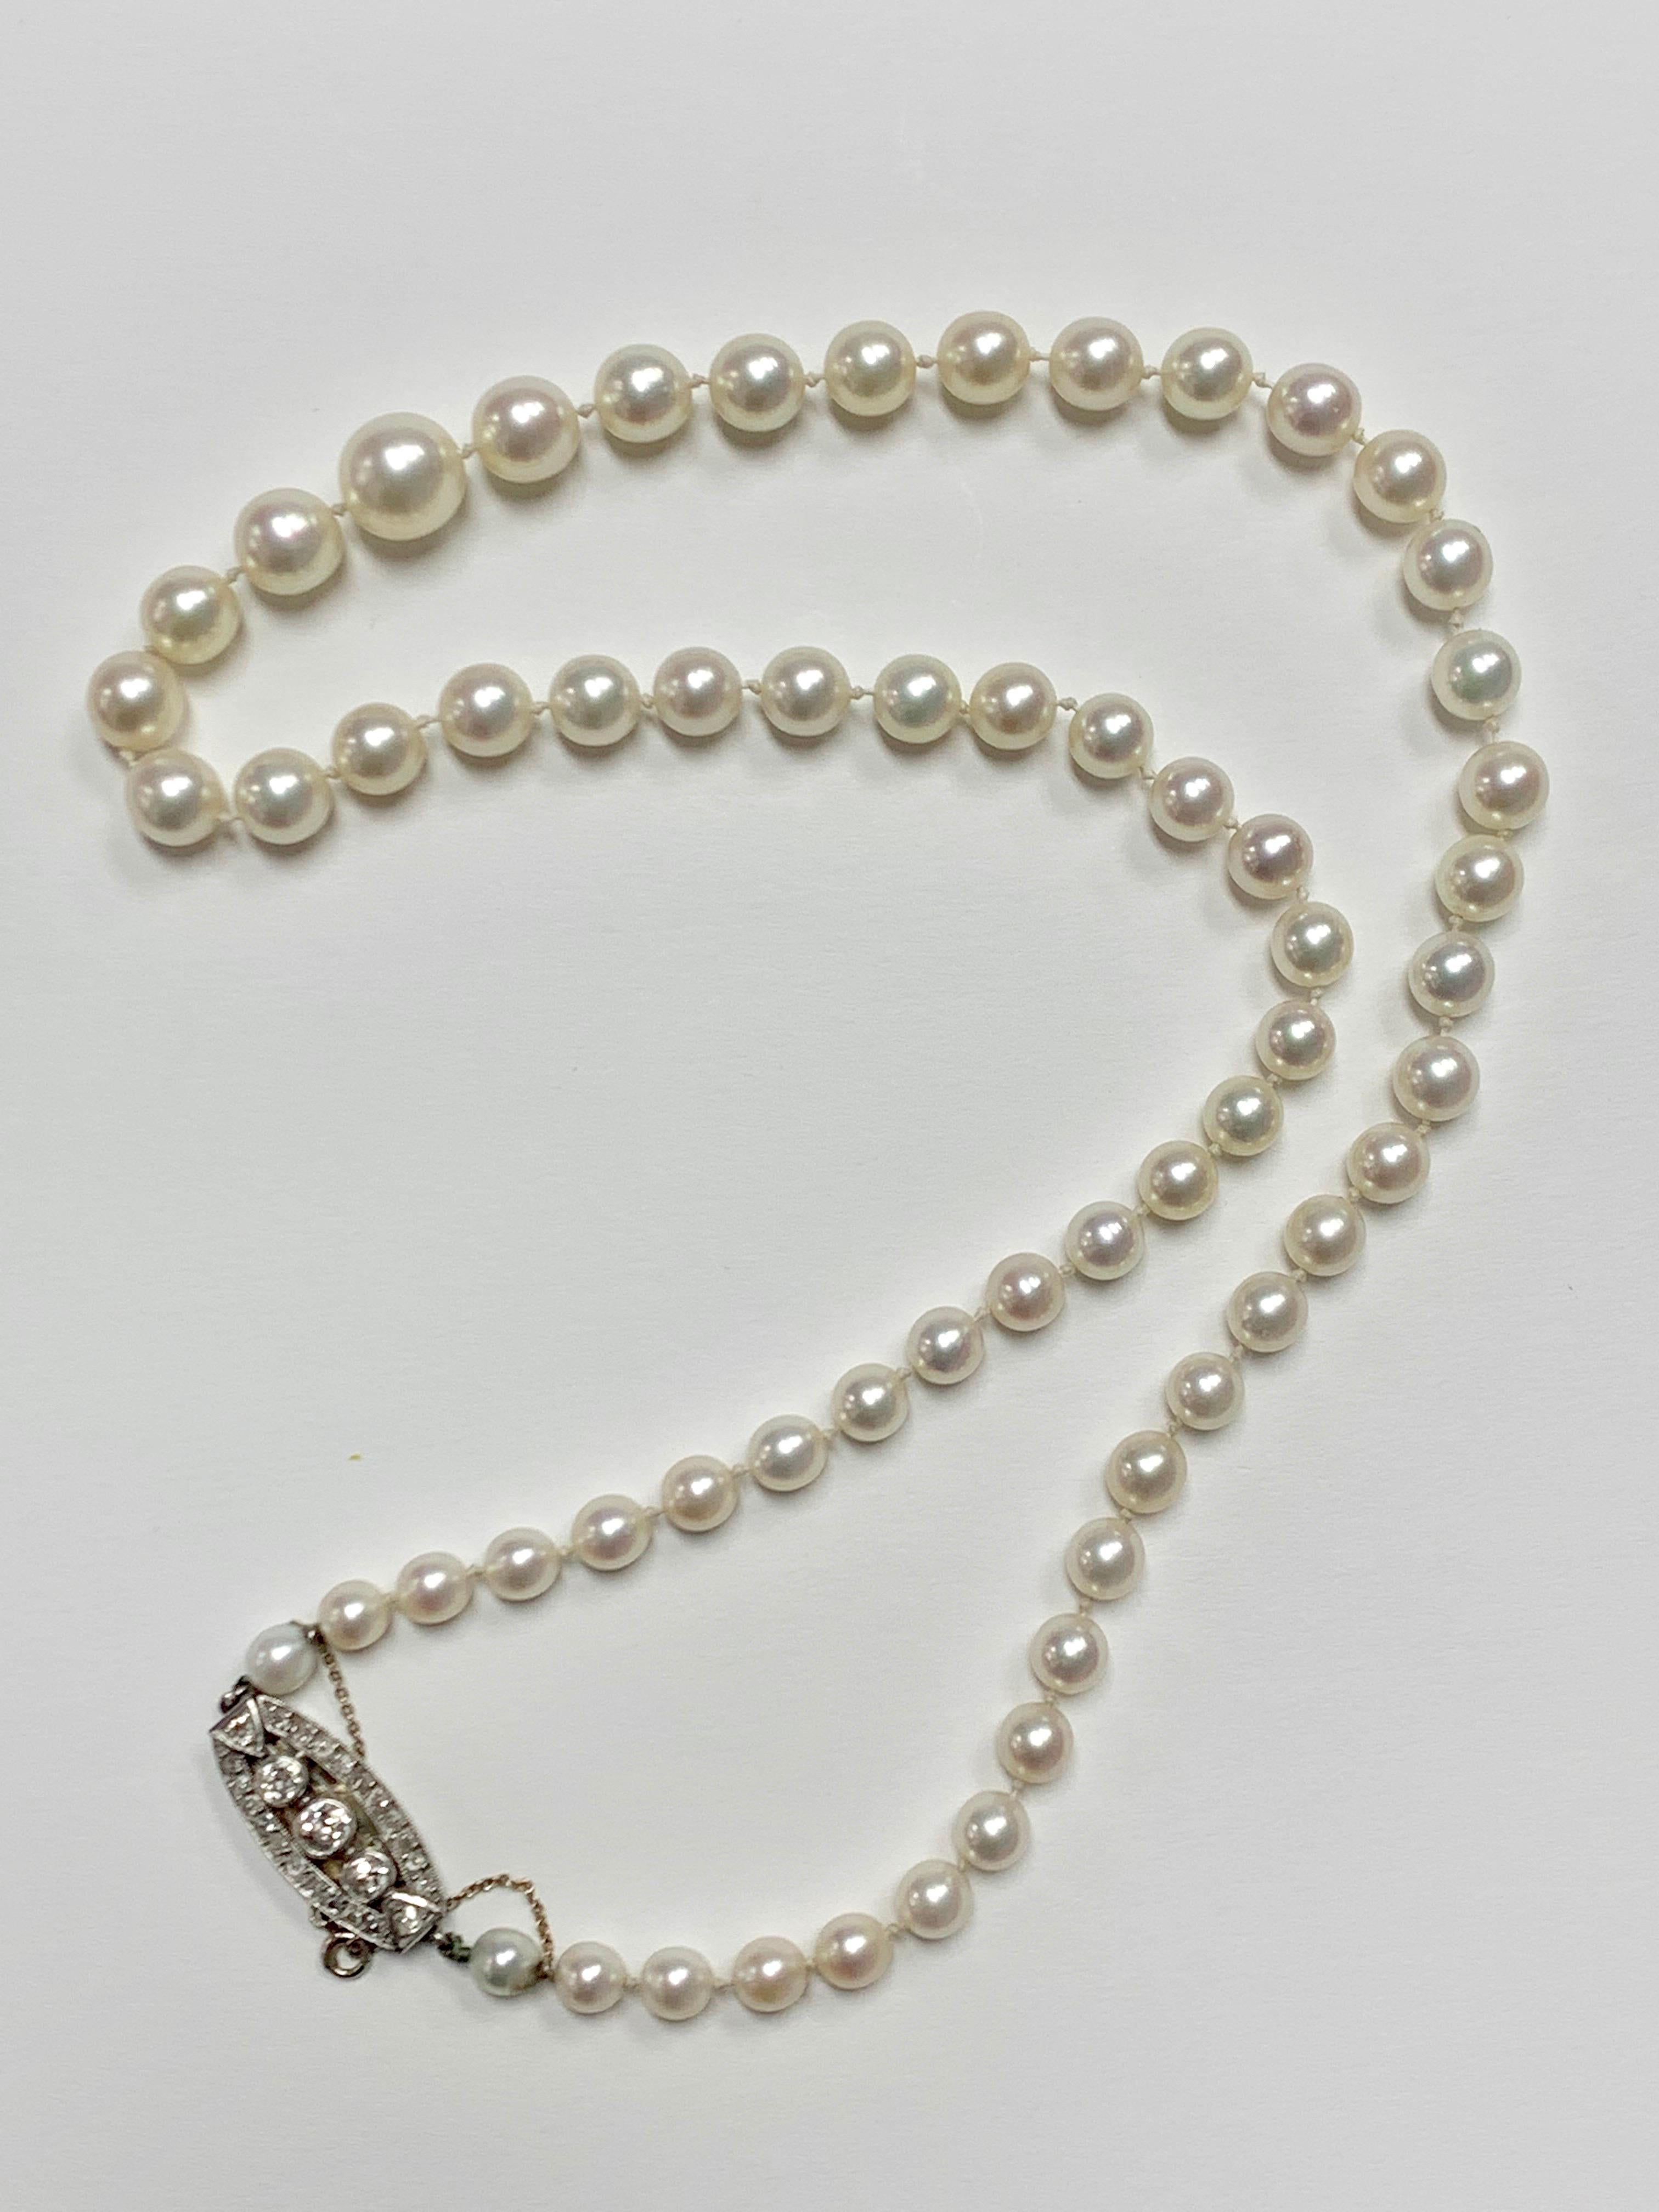 Women's 1920 Cultured Pearl and Diamond Necklace in Platinum, GIA Certified. 